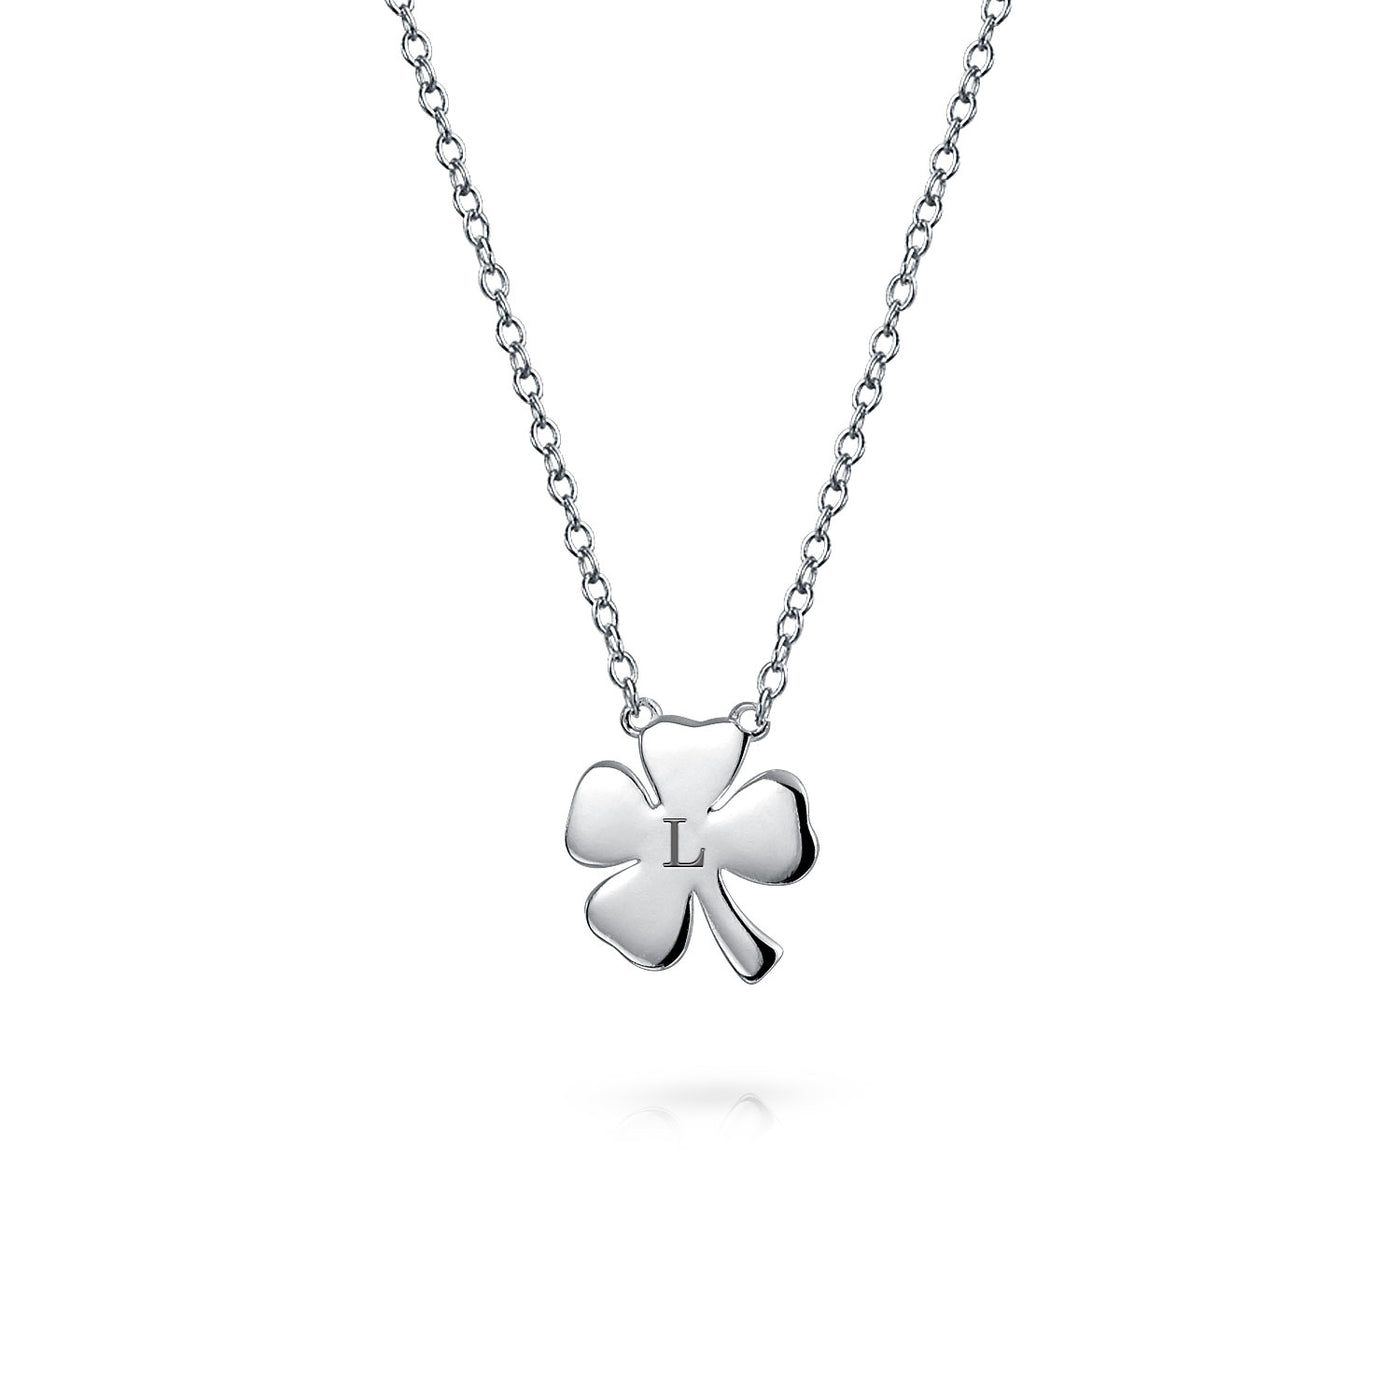 Clover Necklace Bracelet Earring Jewelry Sets for Woman -  Canada